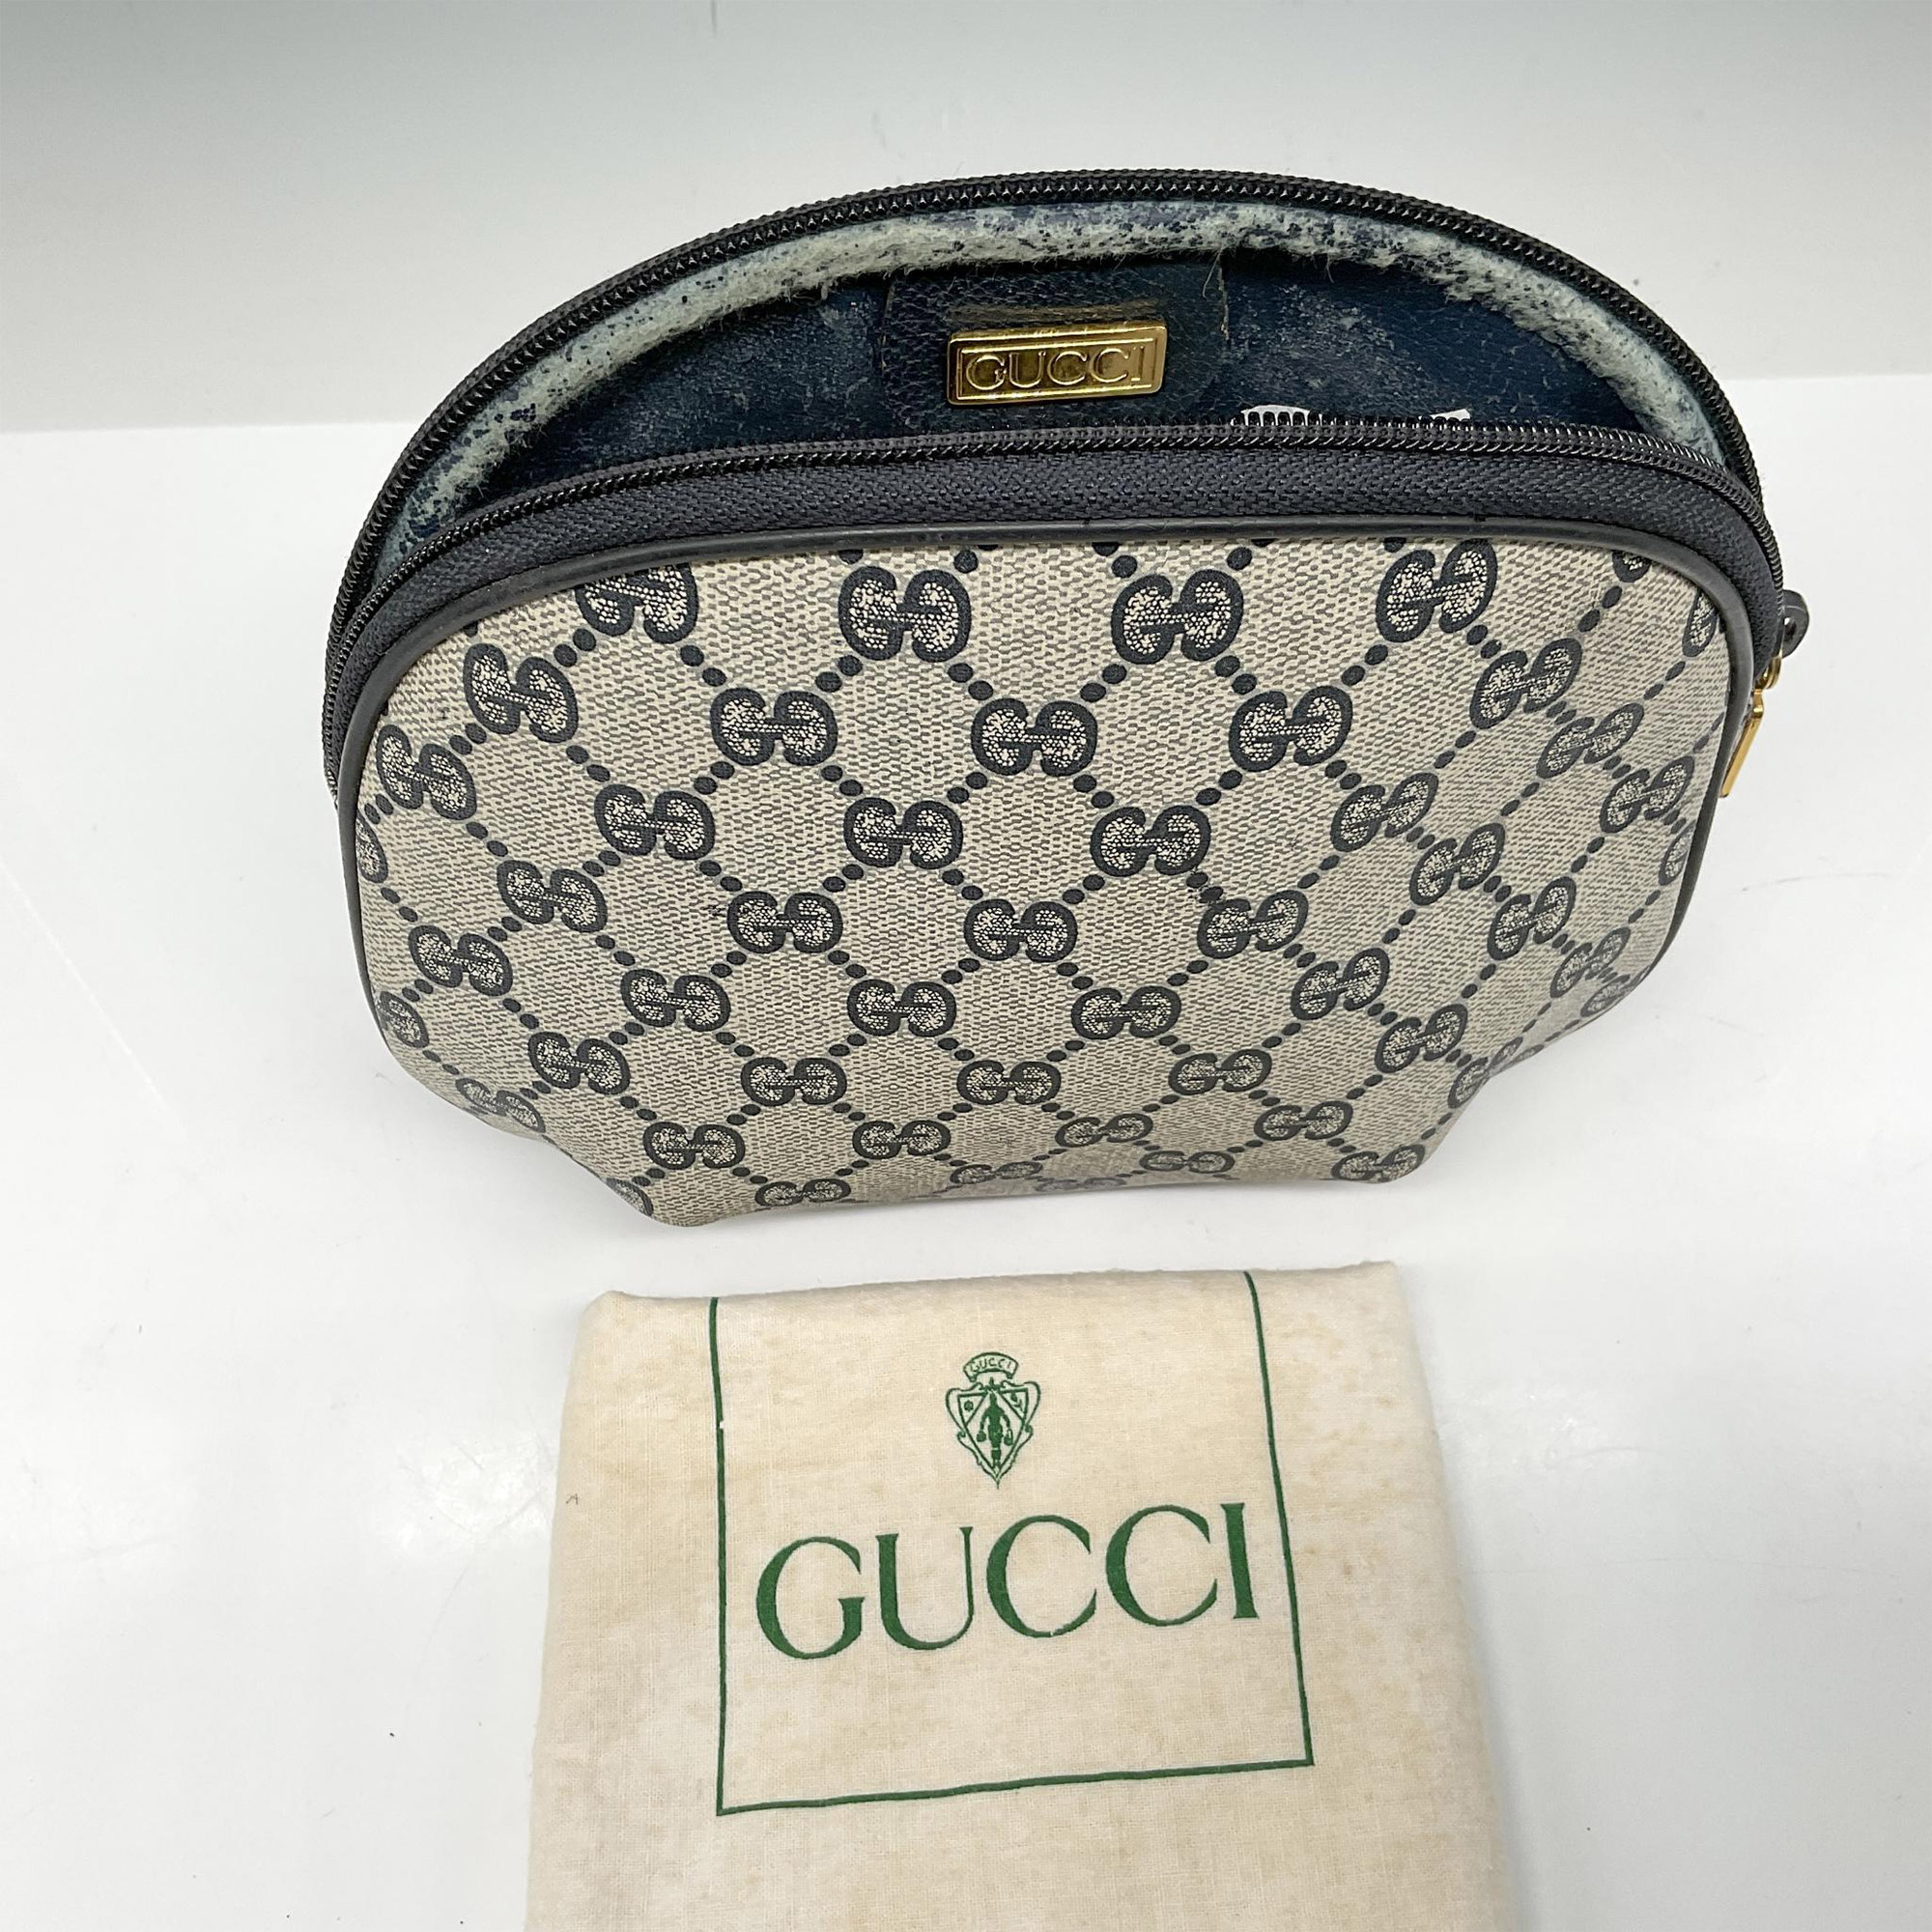 Gucci Zippered Clutch Bag - Image 4 of 4